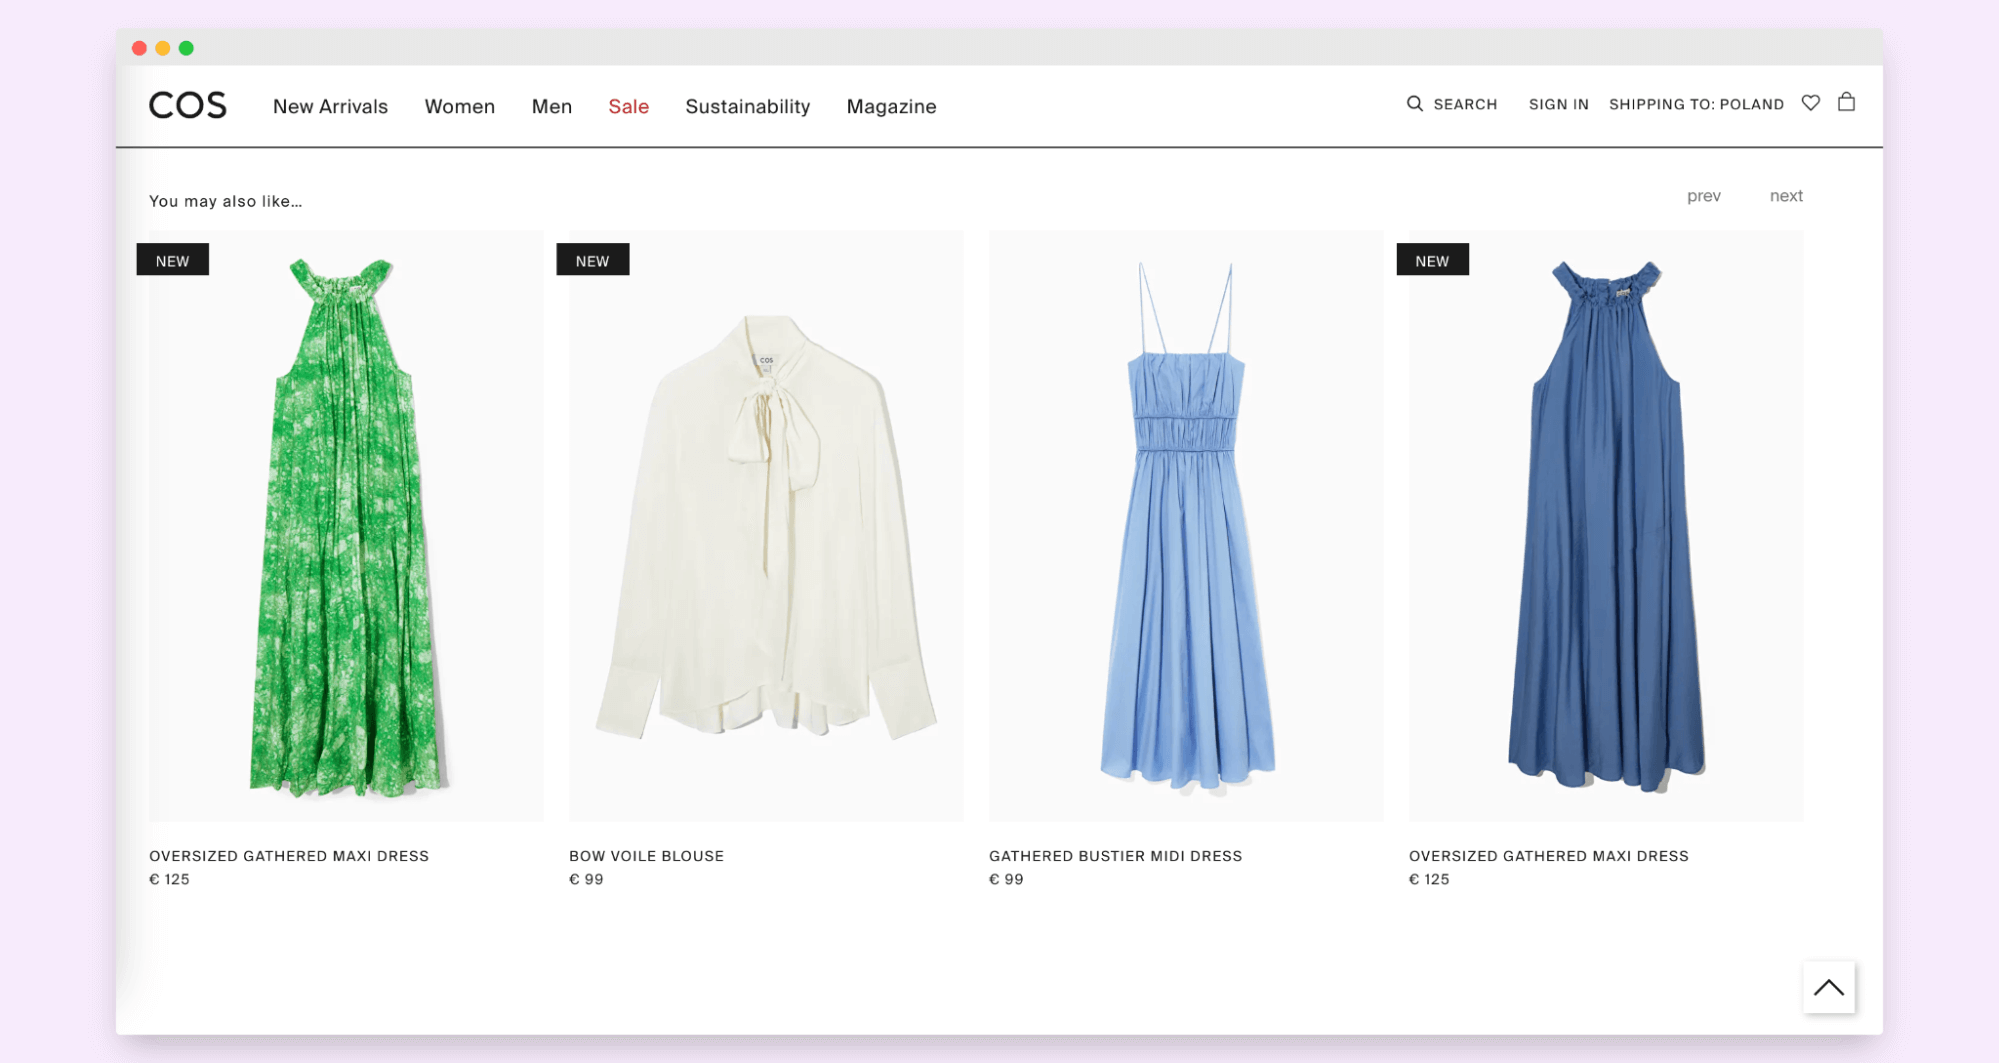 Personalized recommendations based on COS store example.